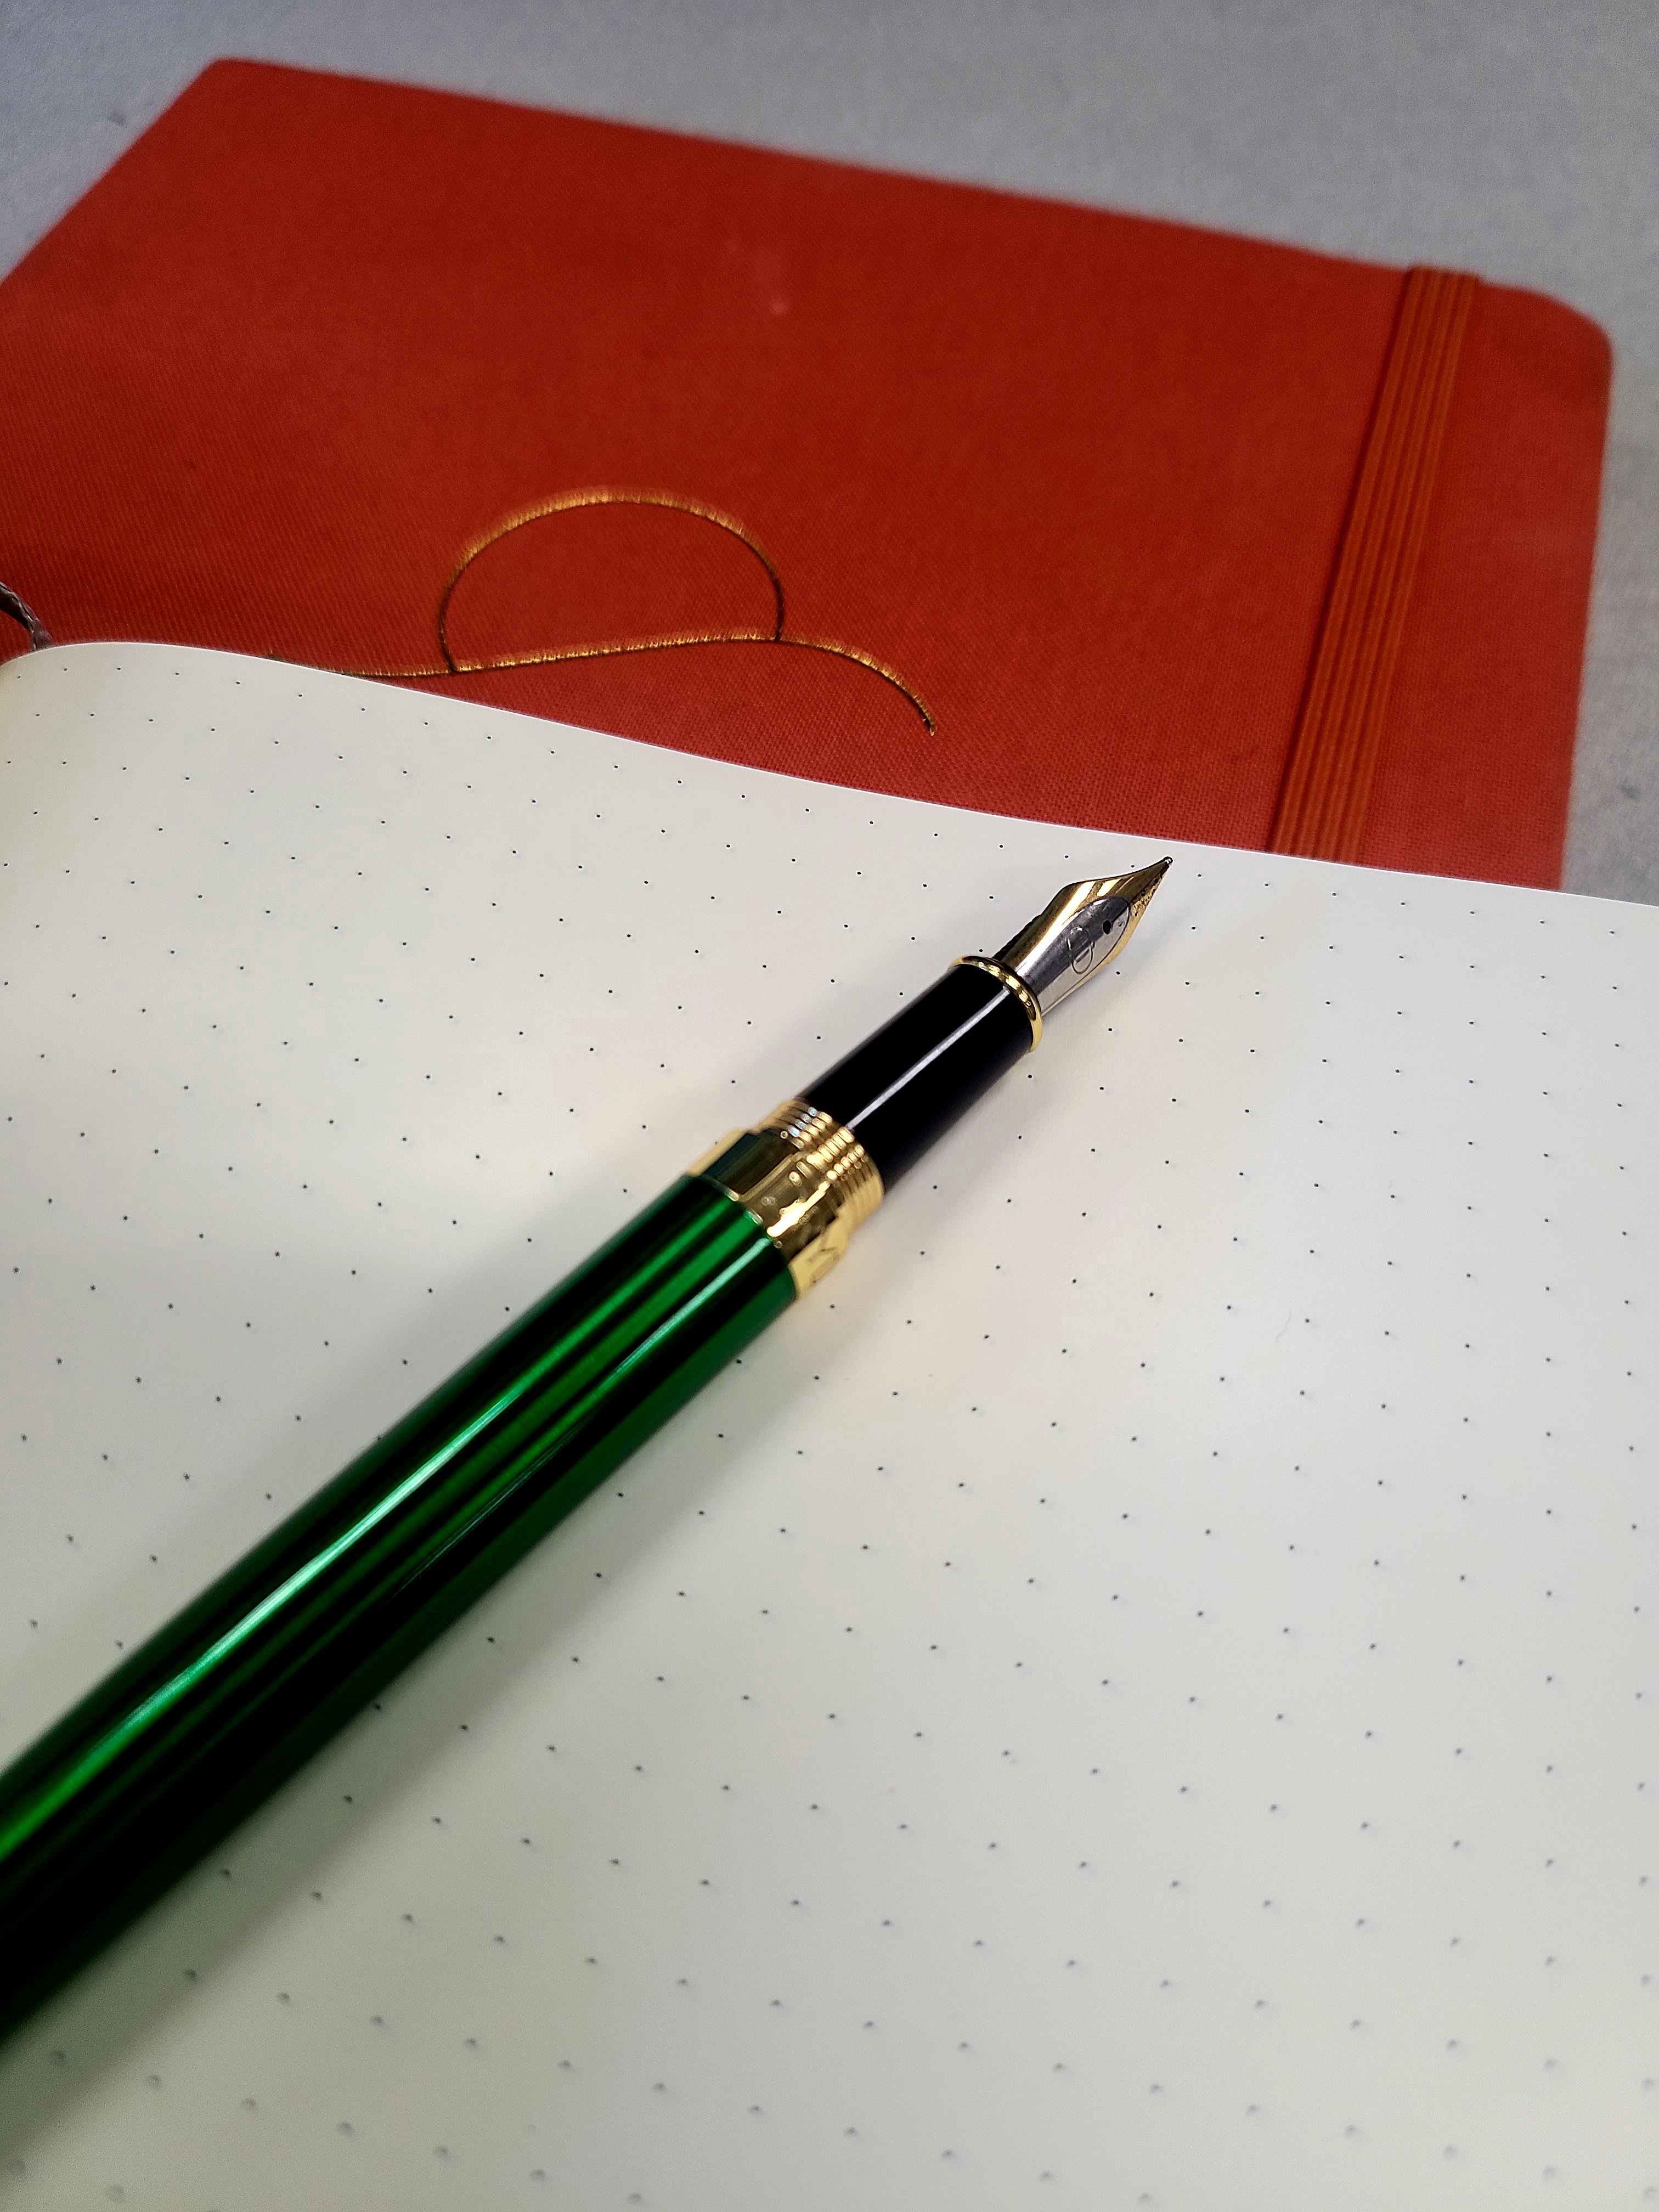 A red journal, grid paper, and a pen